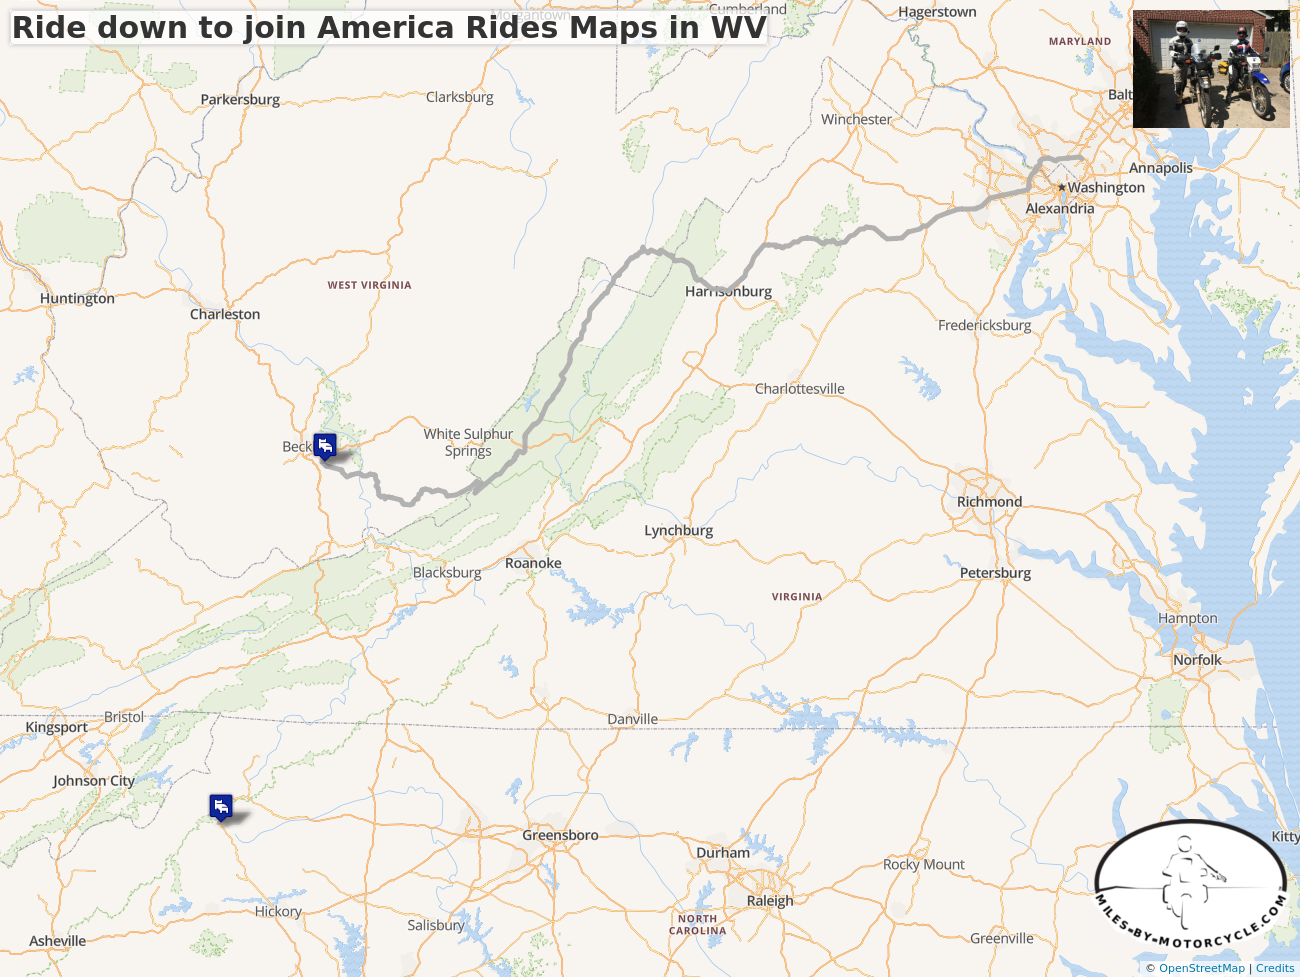 Ride down to join America Rides Maps in WV